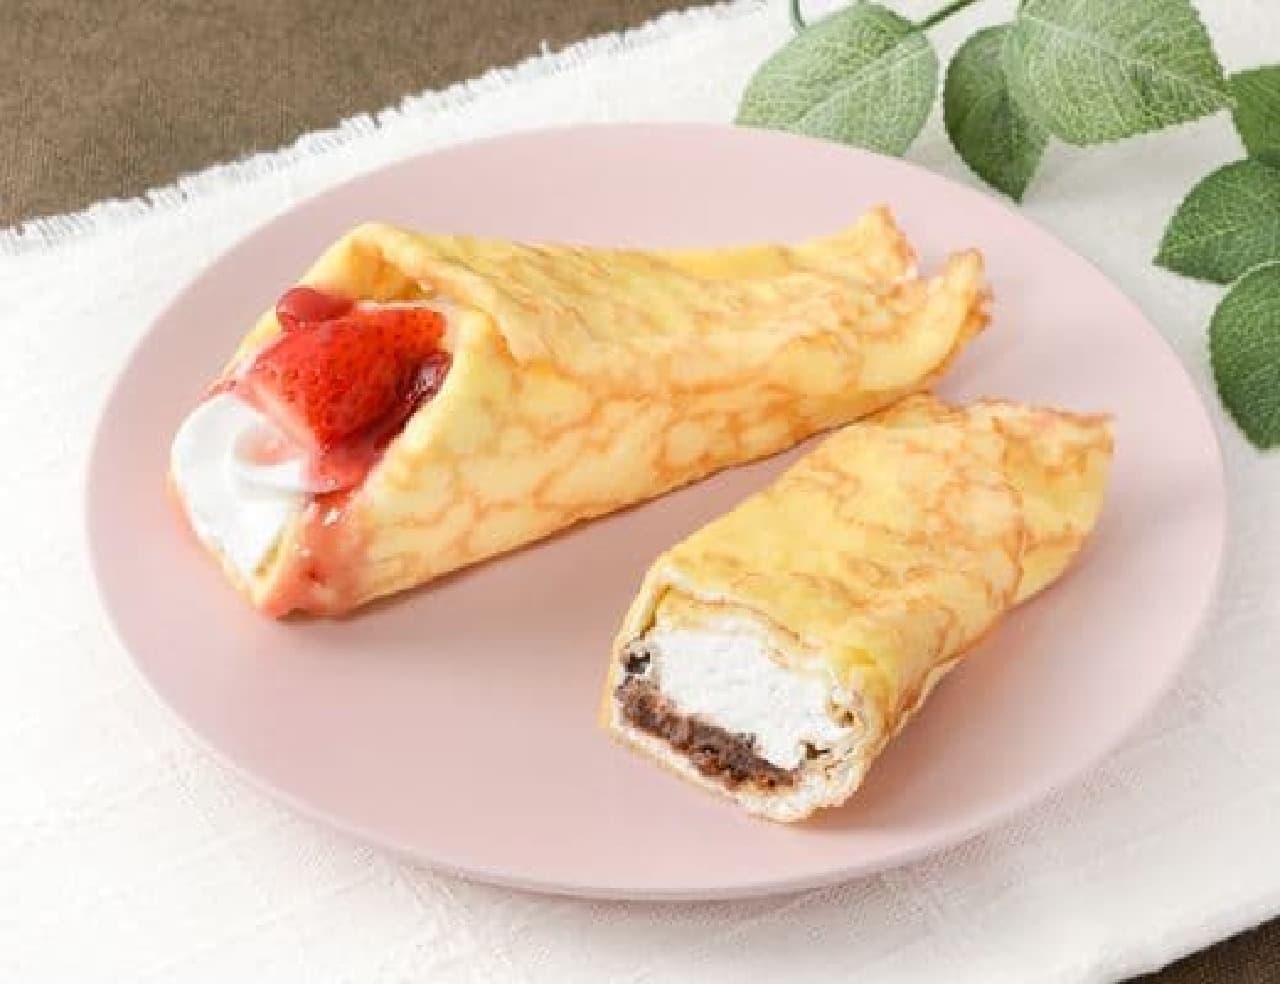 Lawson "Strawberry and chocolate crepe"